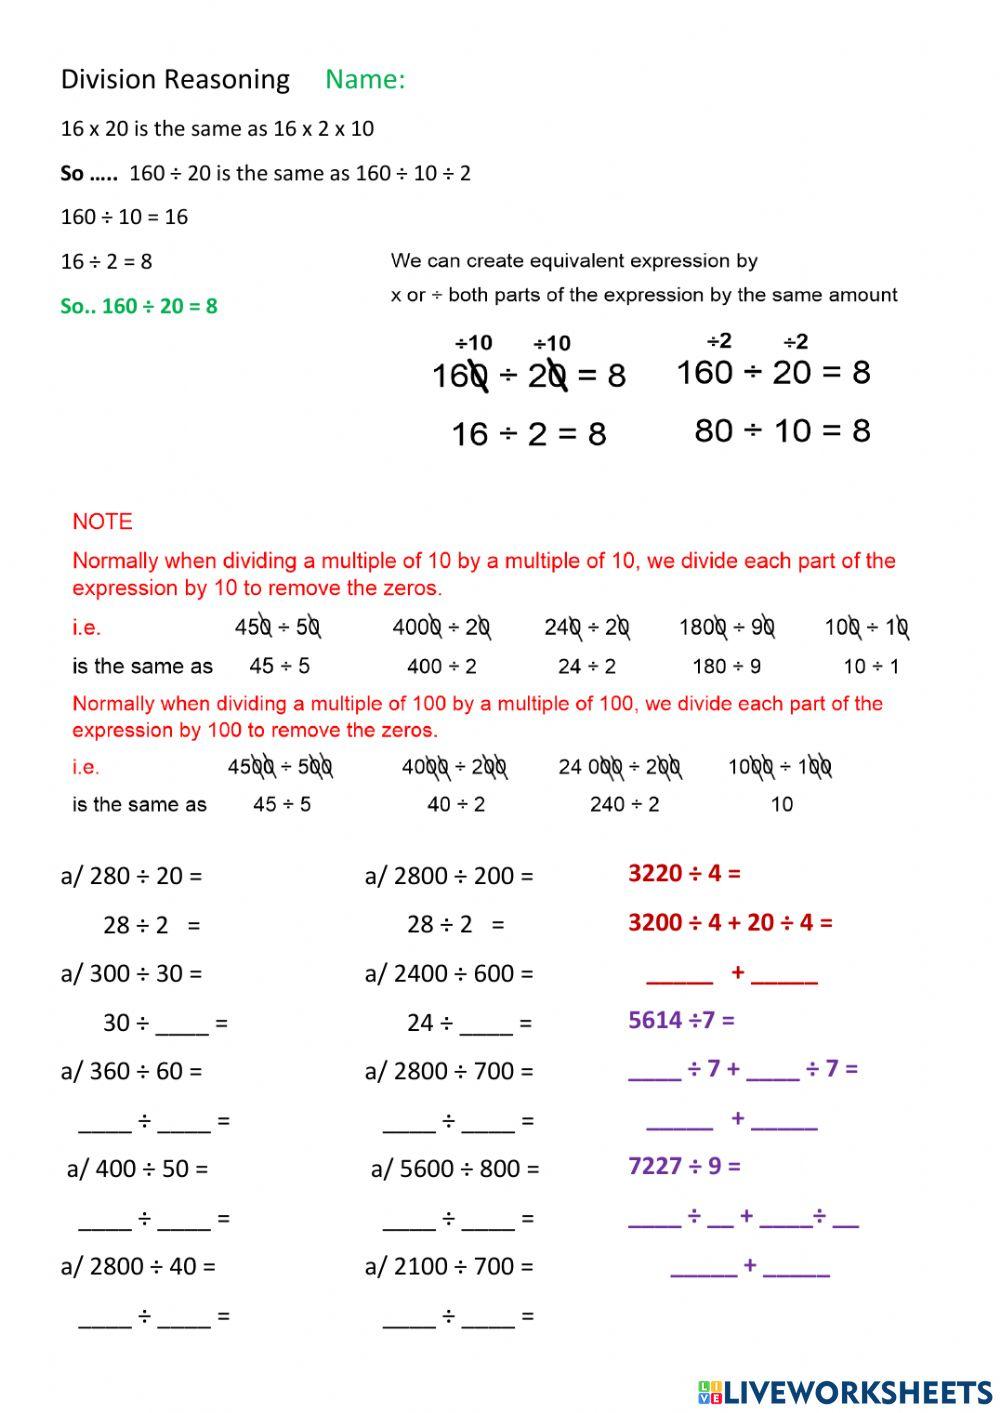 Dividing by 10 and 100 Part 2